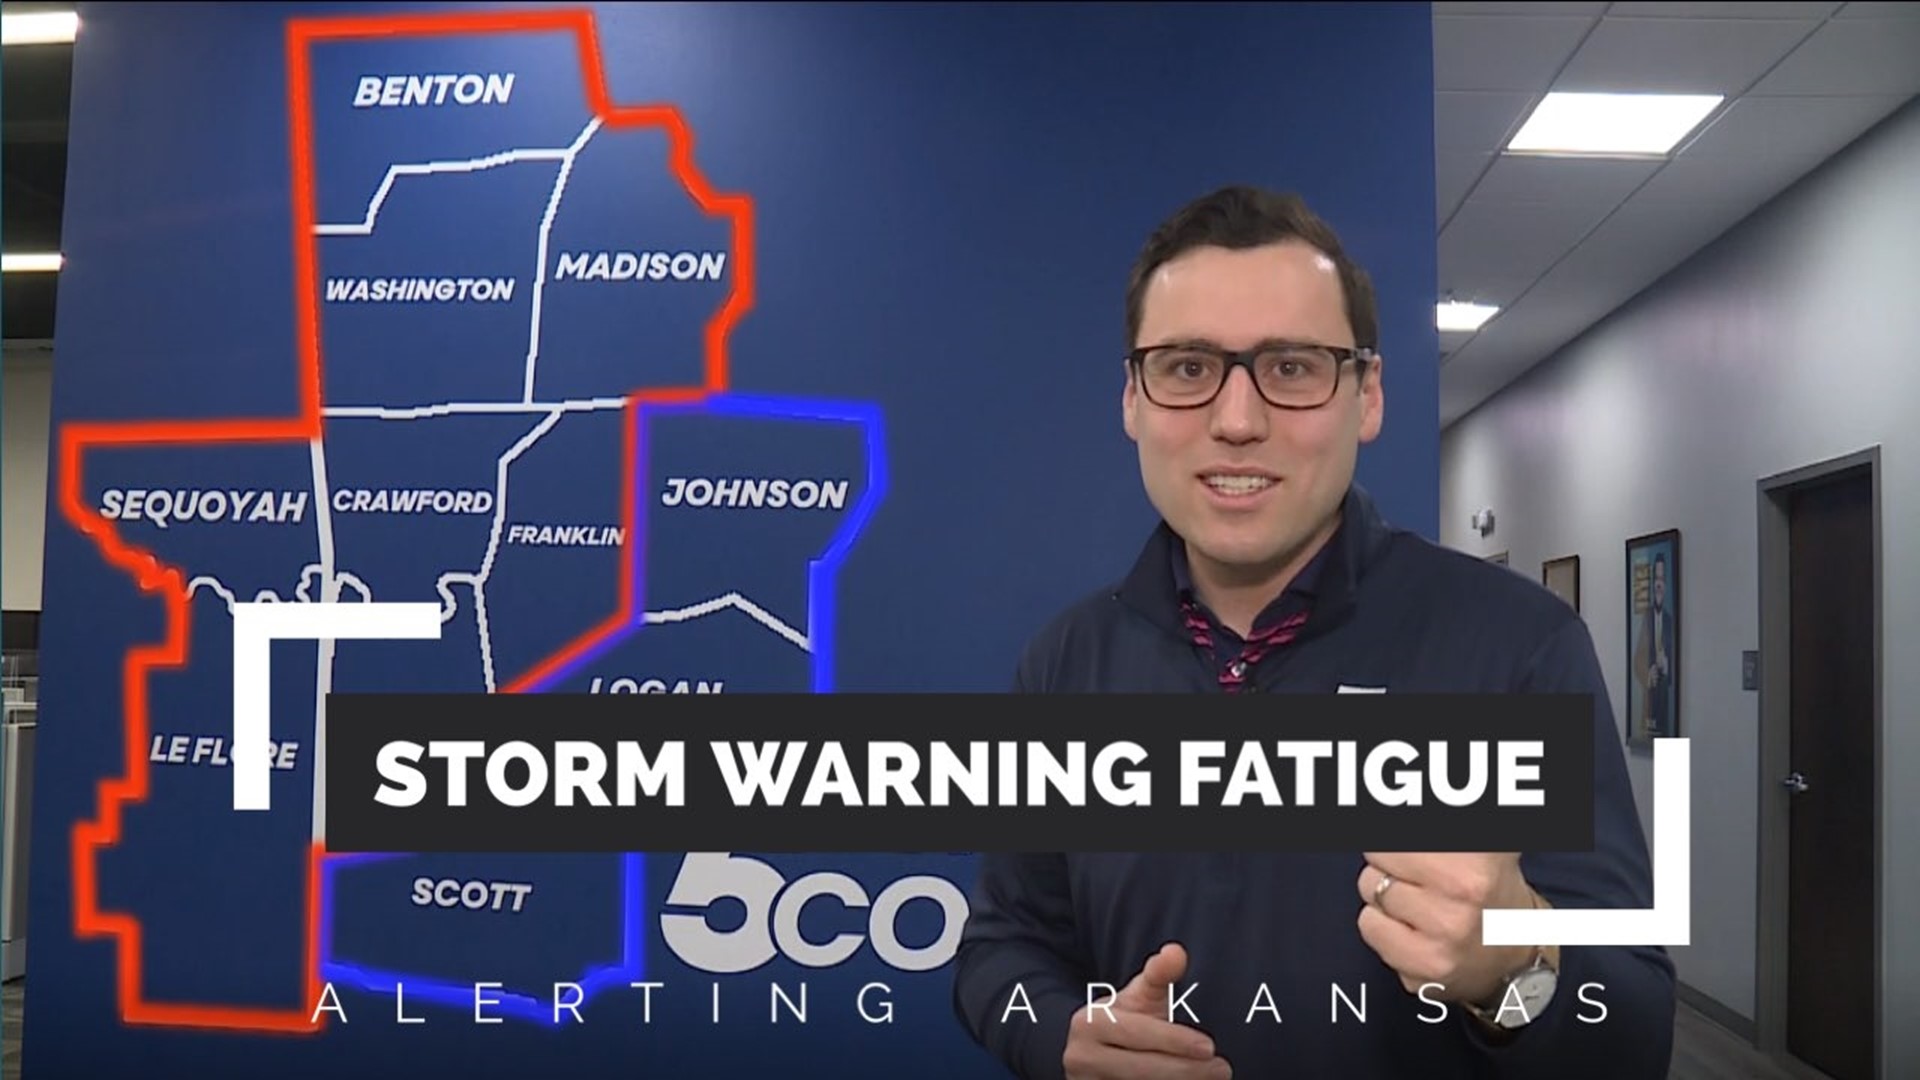 Warning fatigue is a real threat to the public and the forecasters trying to get the word out about potential severe weather repeatedly.